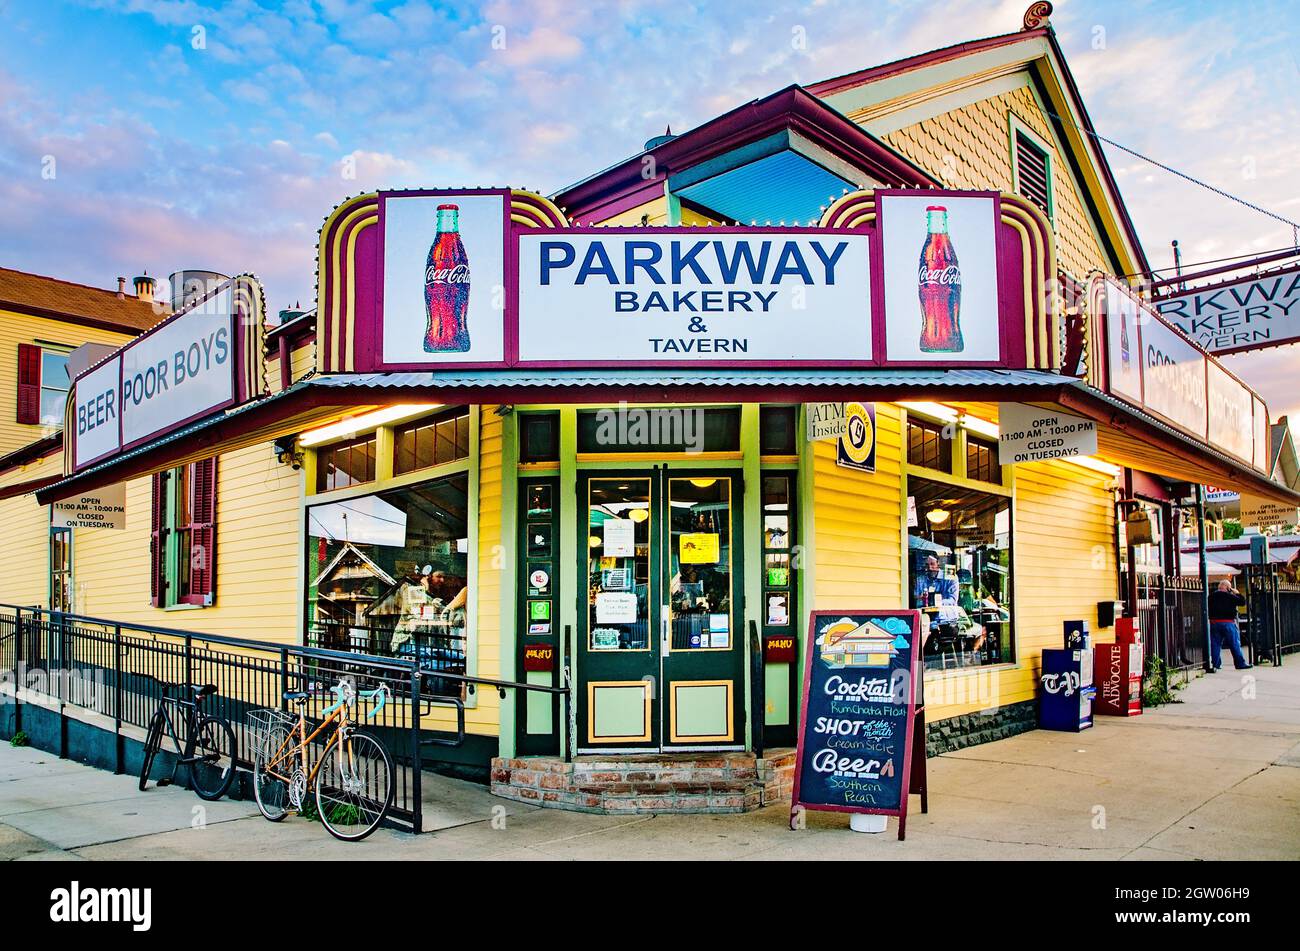 Parkway Bakery & Tavern is pictured at sunset, November 12, 2015, in New Orleans, Louisiana. Parkway was founded in 1911 and is known for its po’ boys. Stock Photo